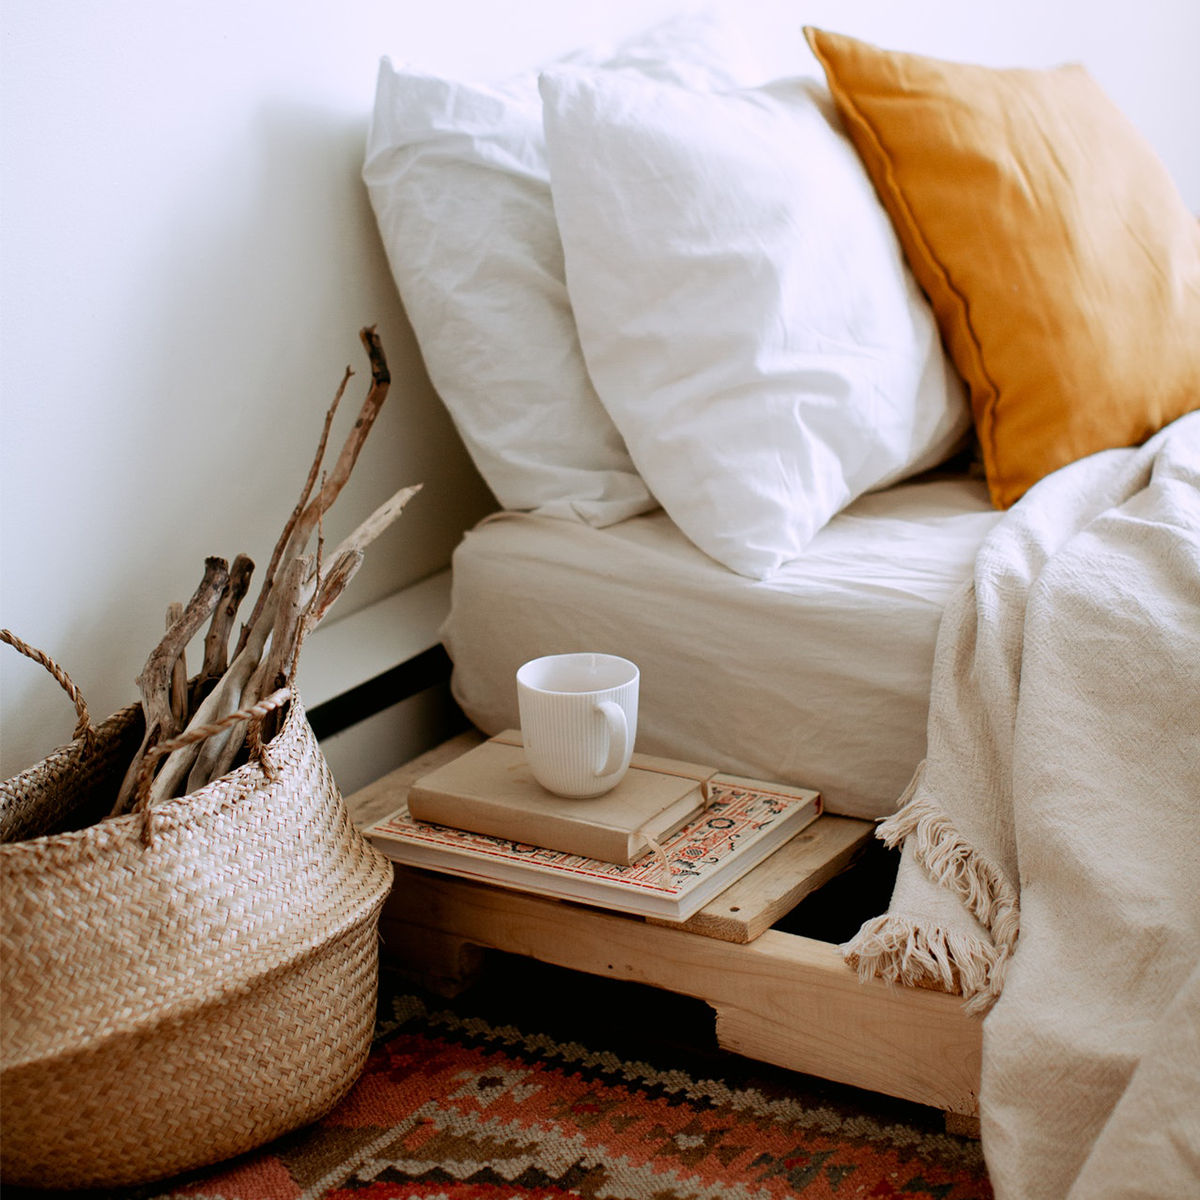 Cozy carpeted room with warm blankets and a mug